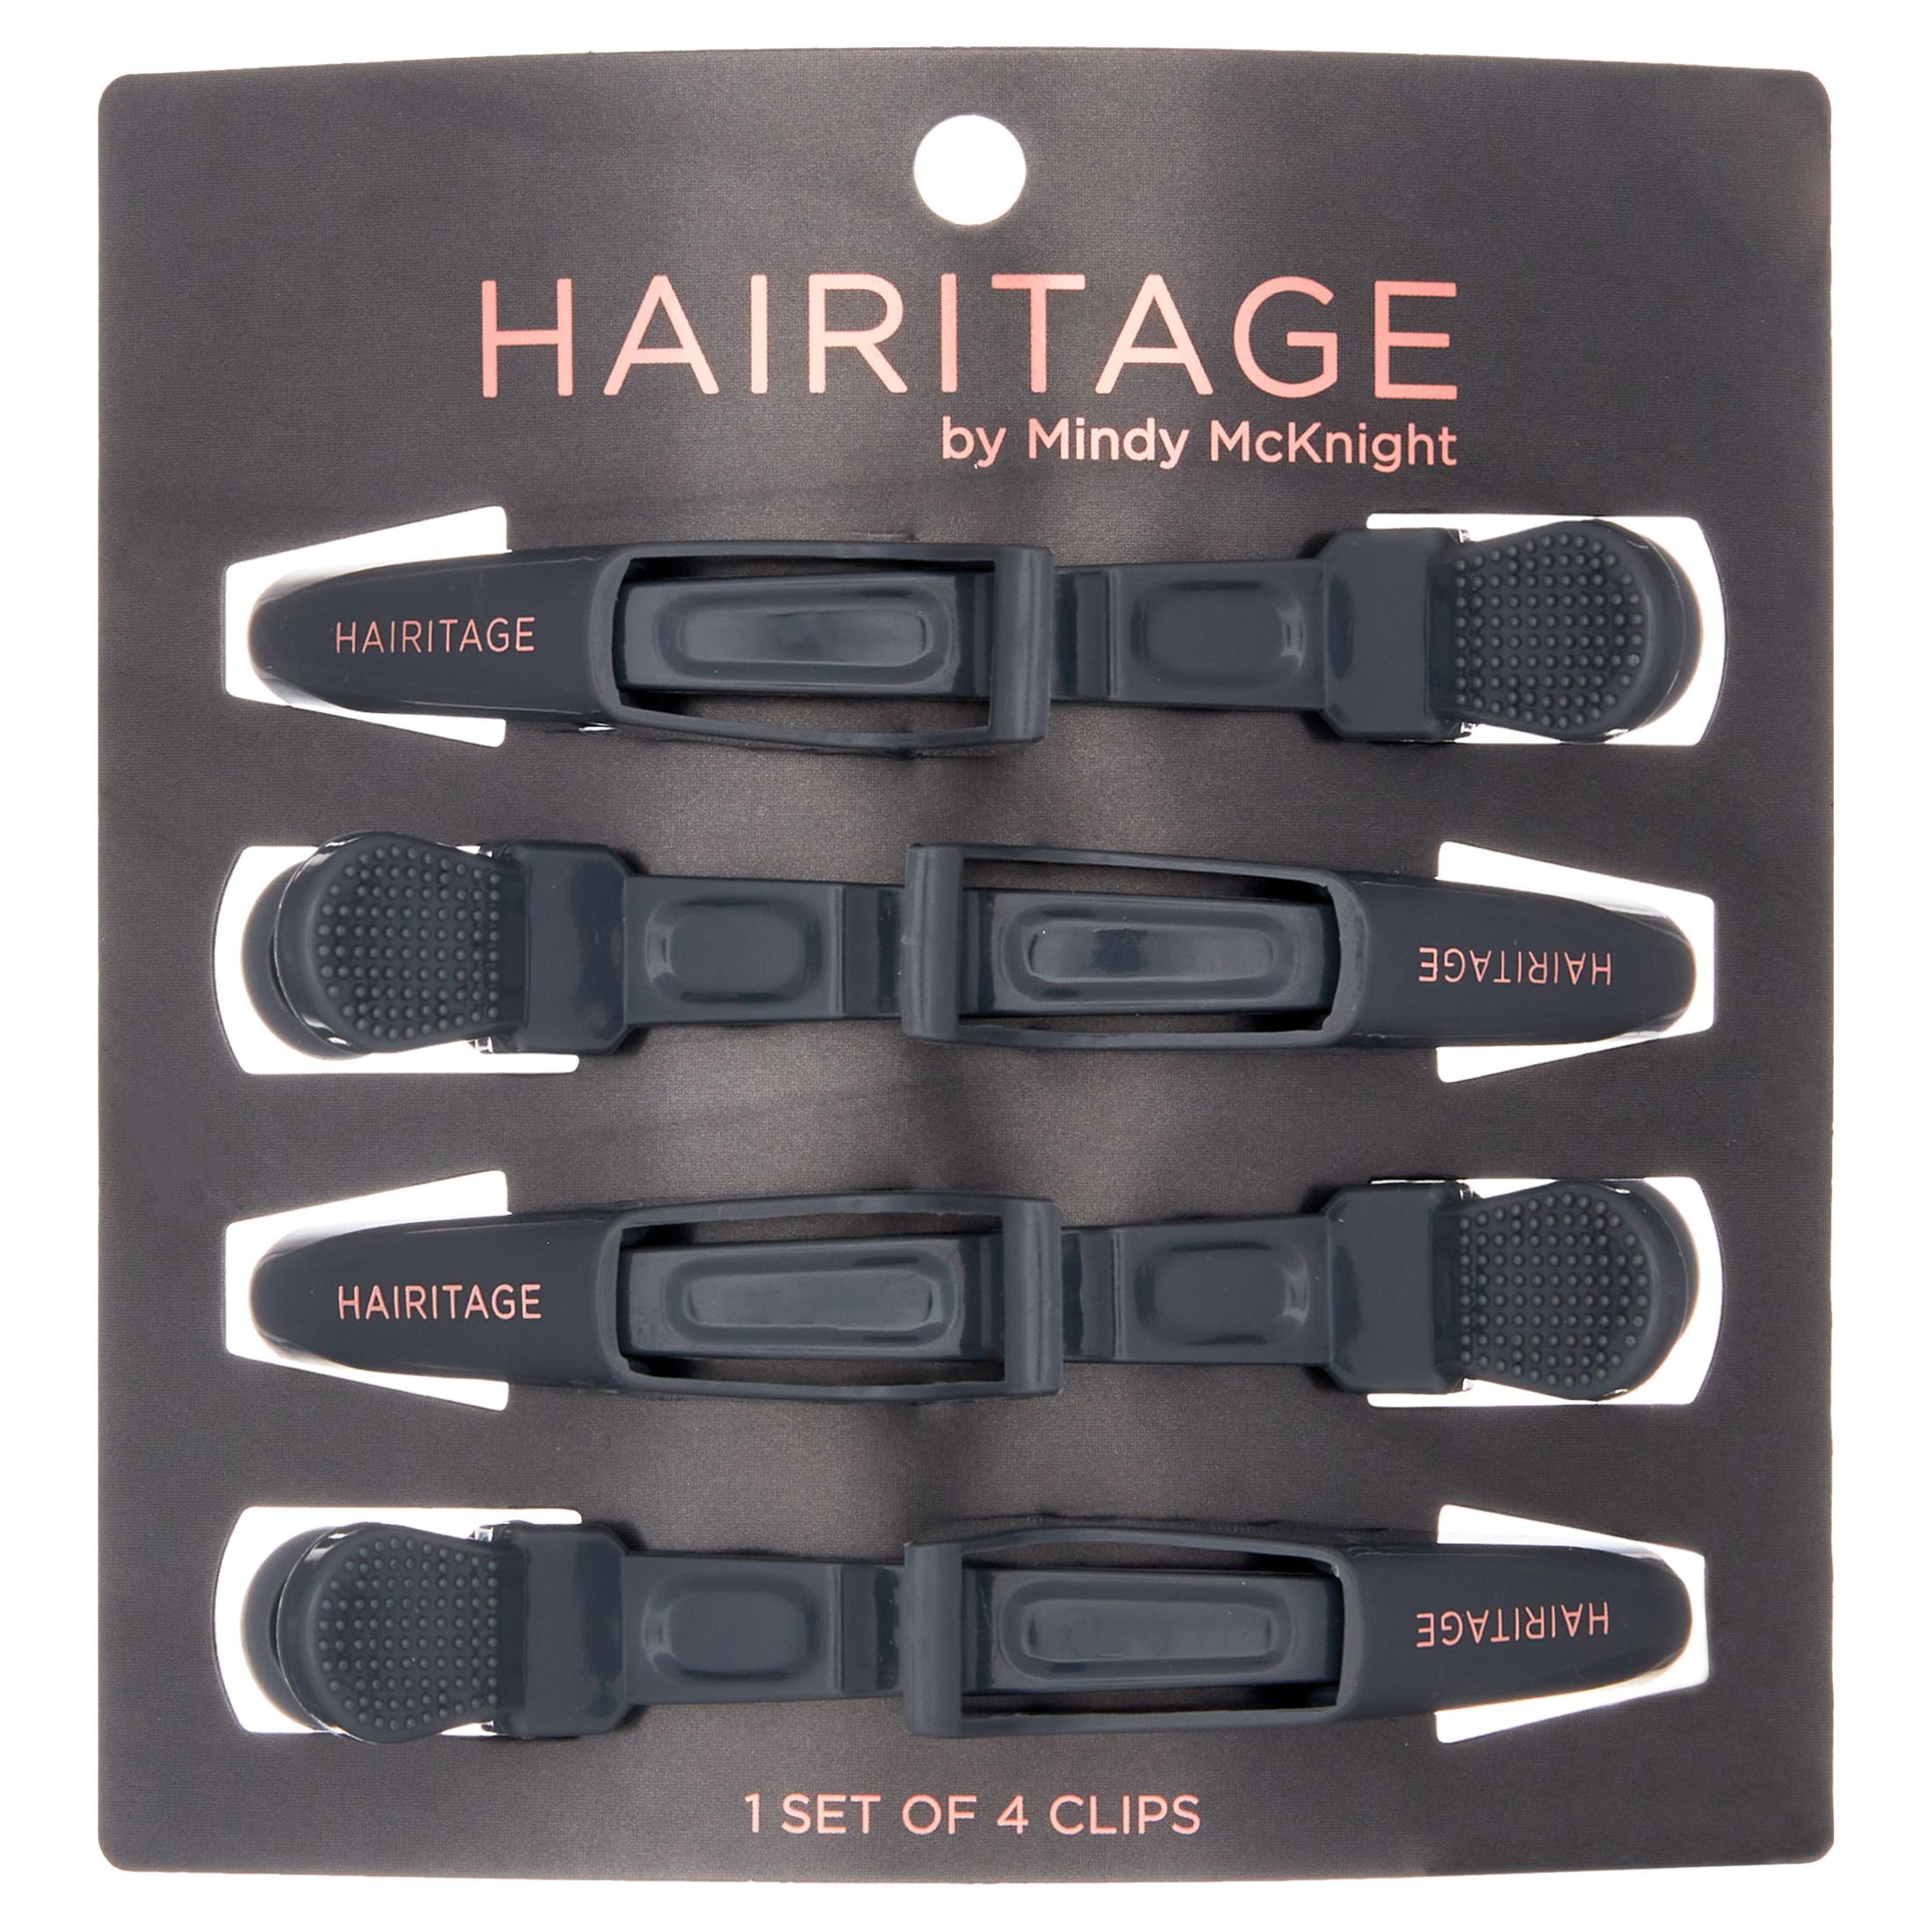 Hairitage Out of My Way Alligator Hair Clips, 4 PC - image 1 of 10